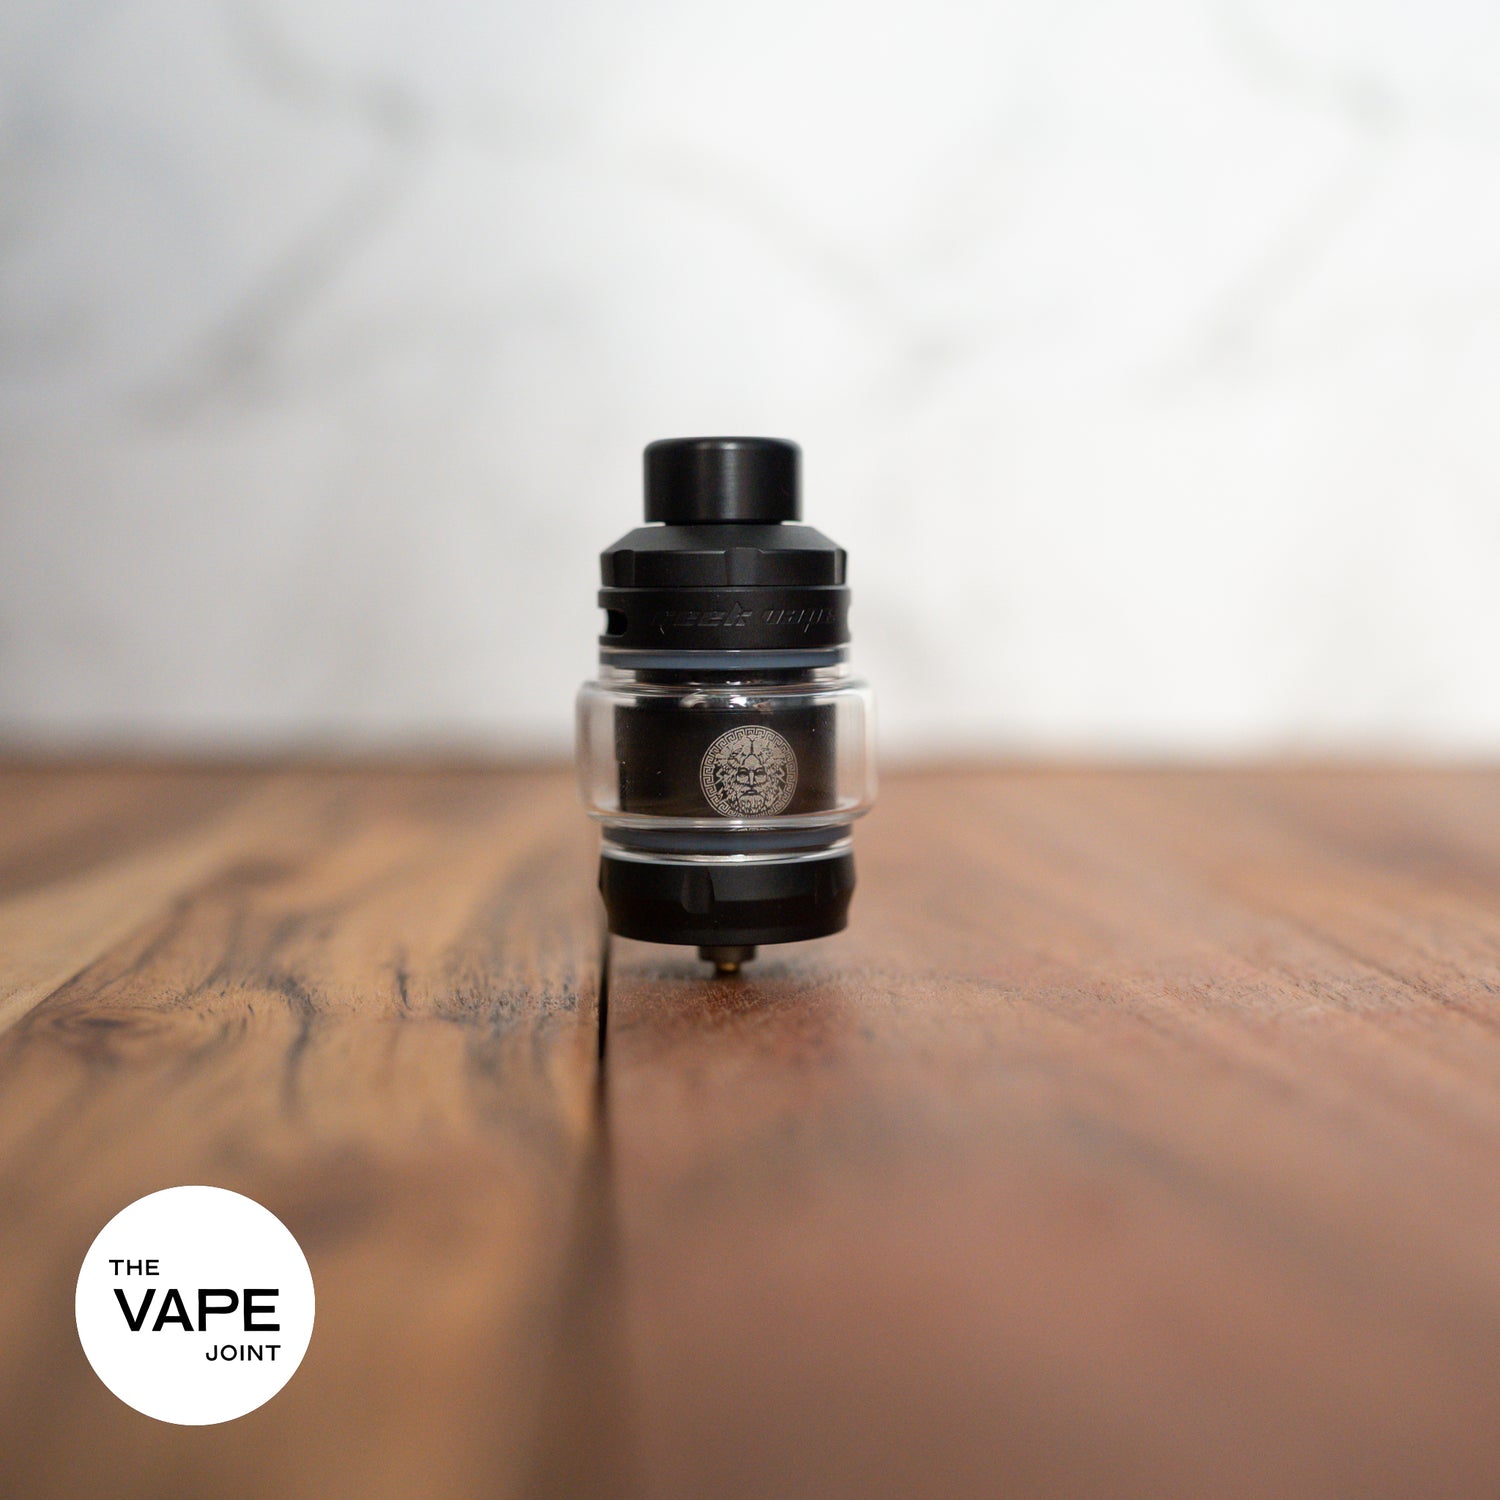 4 Factors to Consider When Buying A Vape Tank